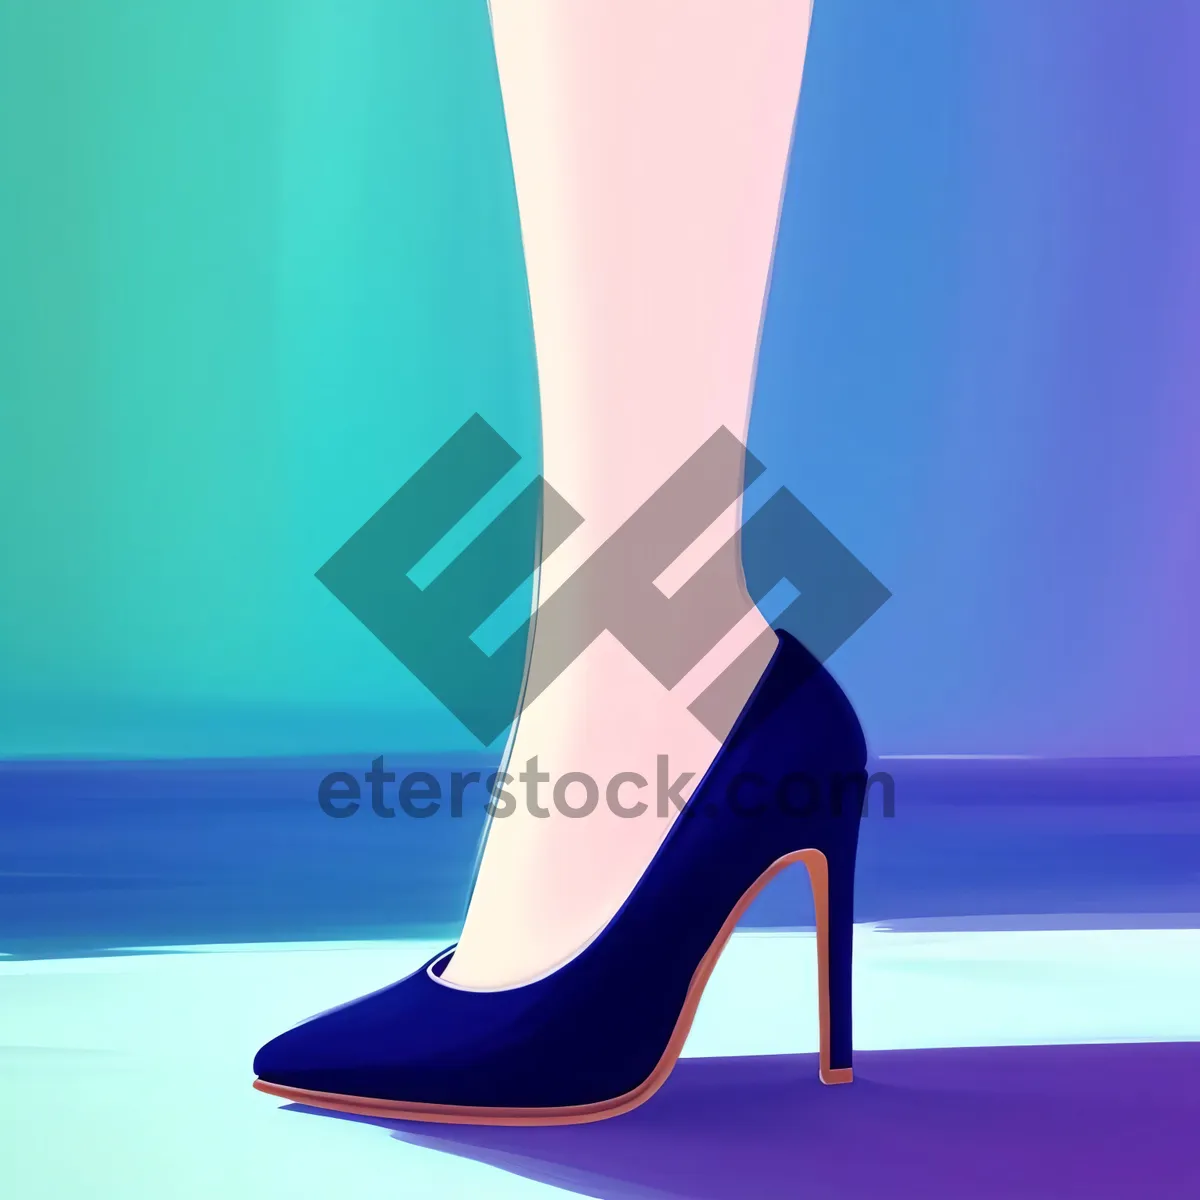 Picture of Fit legs in stylish footwear pose